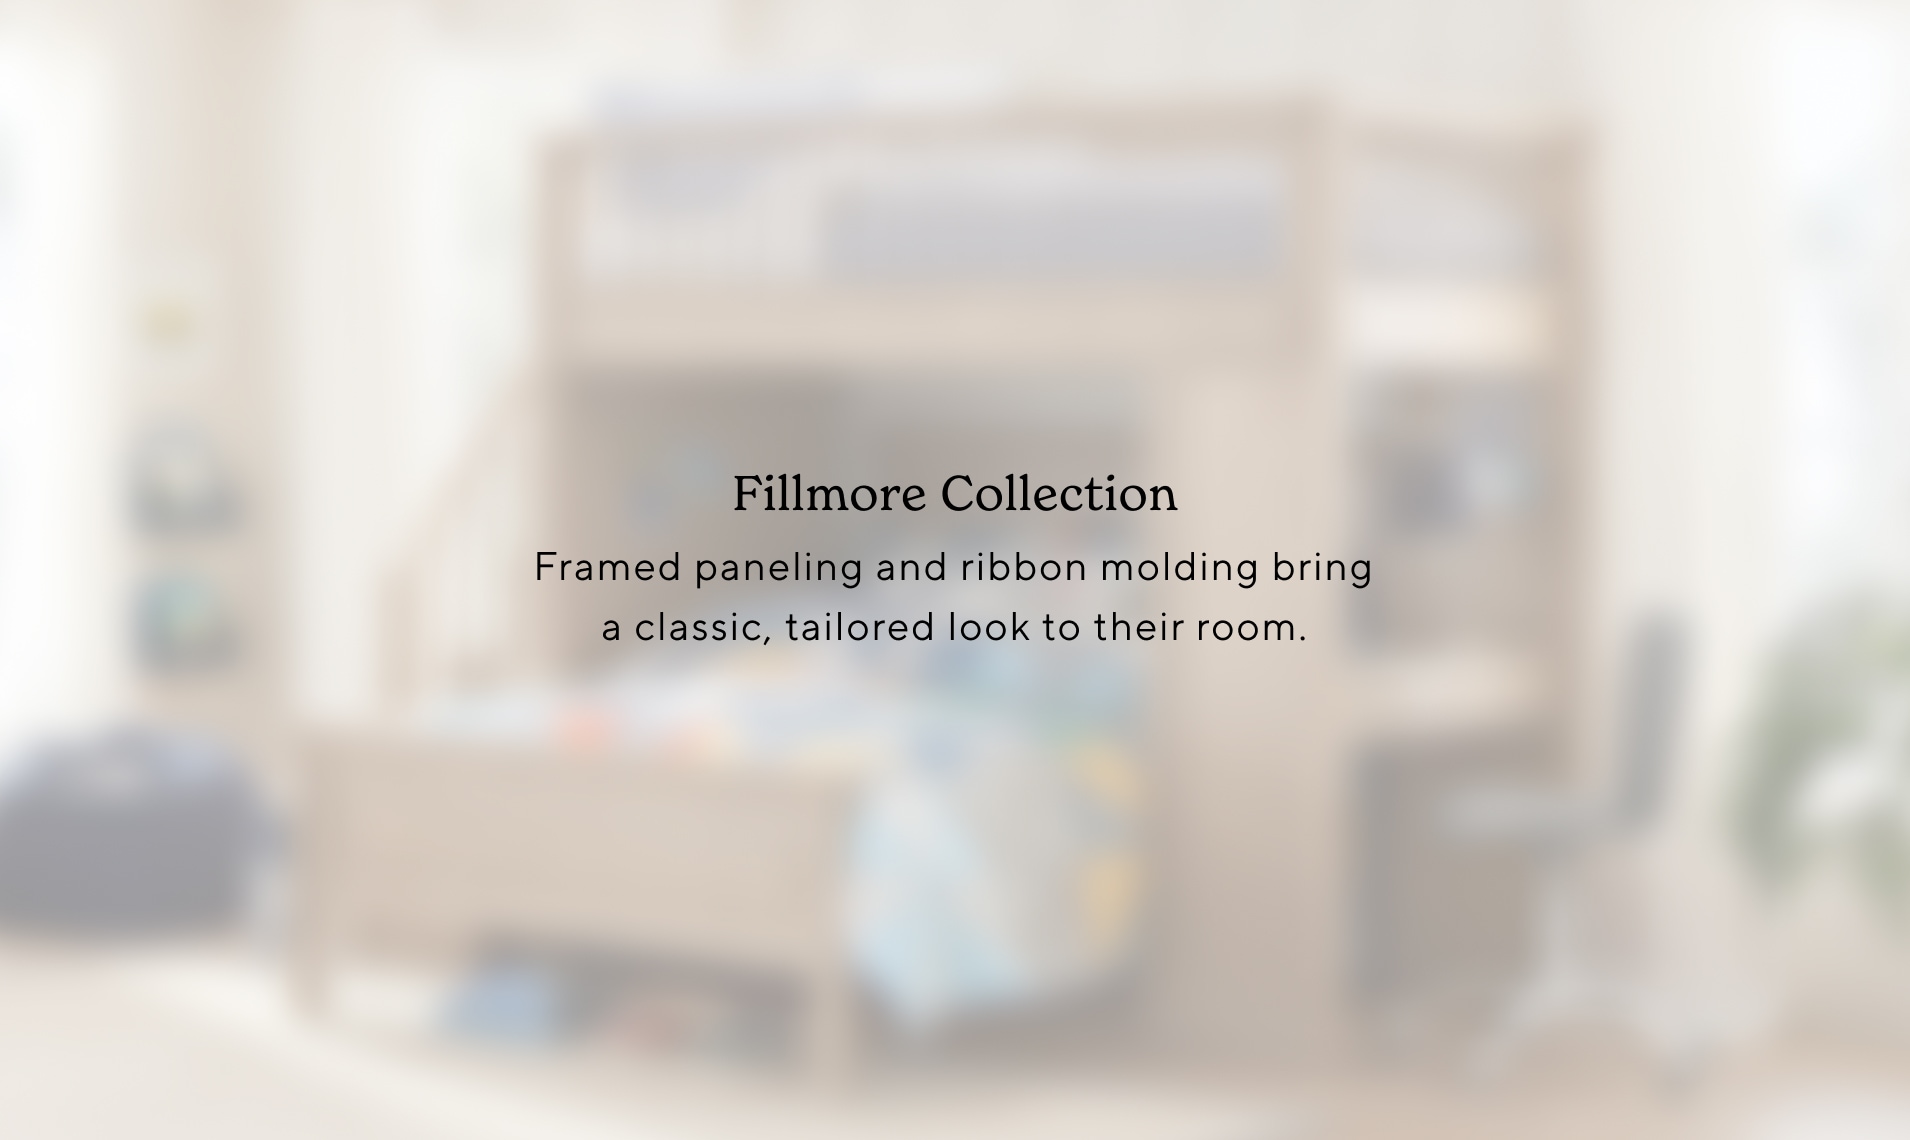 Fillmore Collection